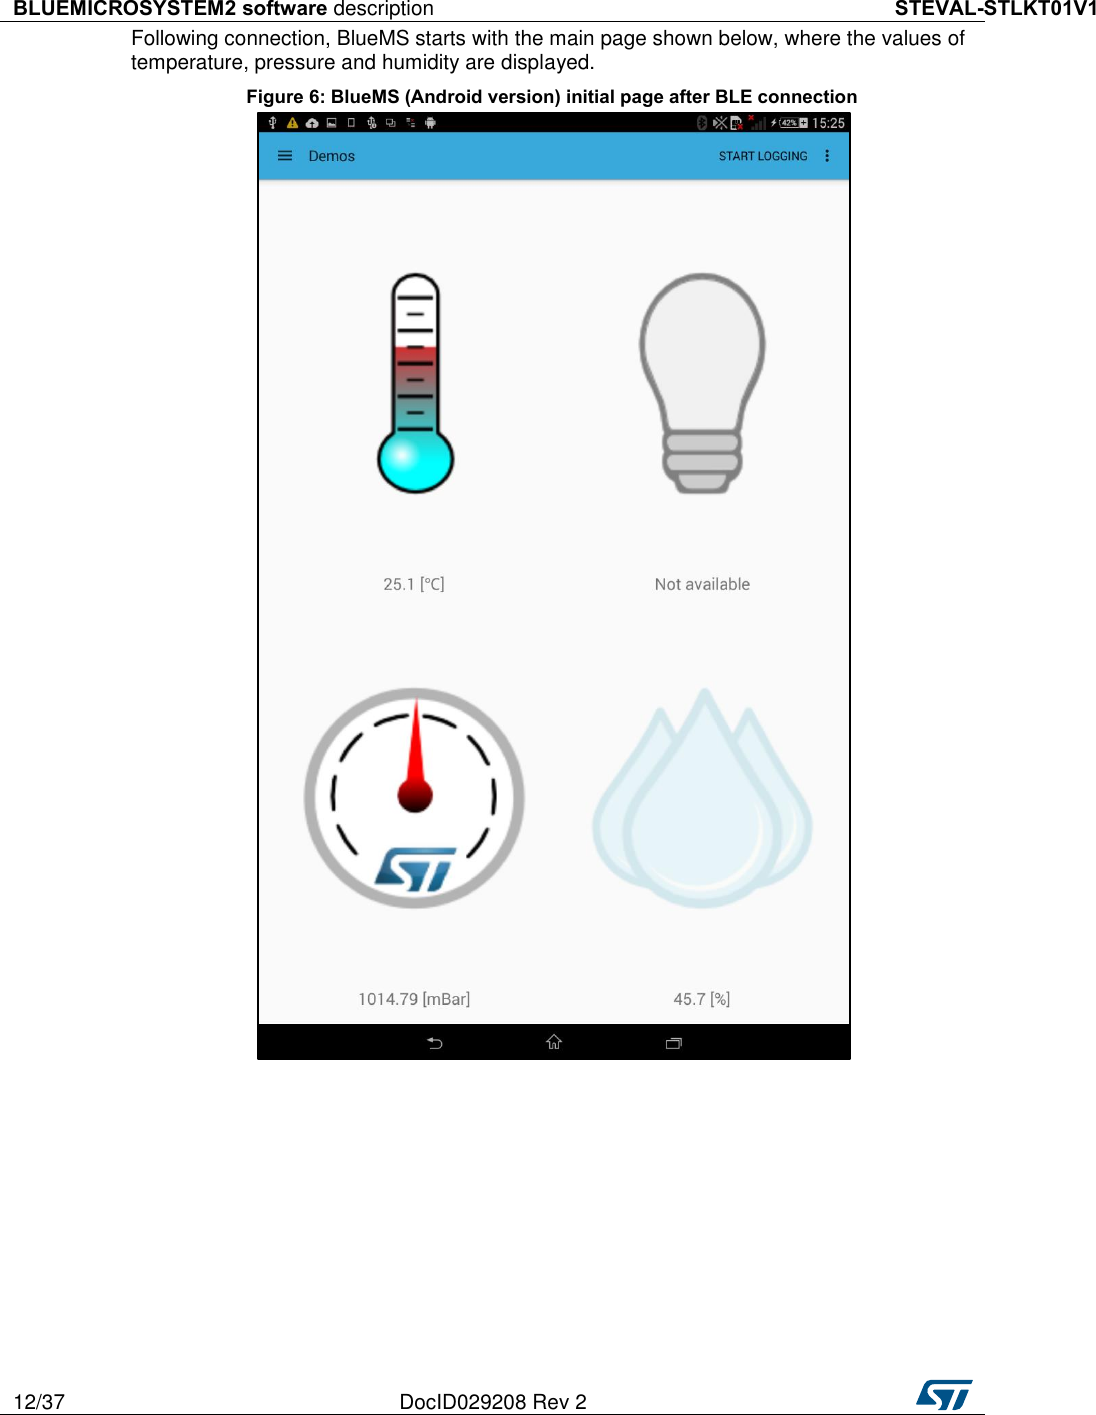 BLUEMICROSYSTEM2 software description STEVAL-STLKT01V1 12/37 DocID029208 Rev 2   Following connection, BlueMS starts with the main page shown below, where the values of temperature, pressure and humidity are displayed. Figure 6: BlueMS (Android version) initial page after BLE connection  